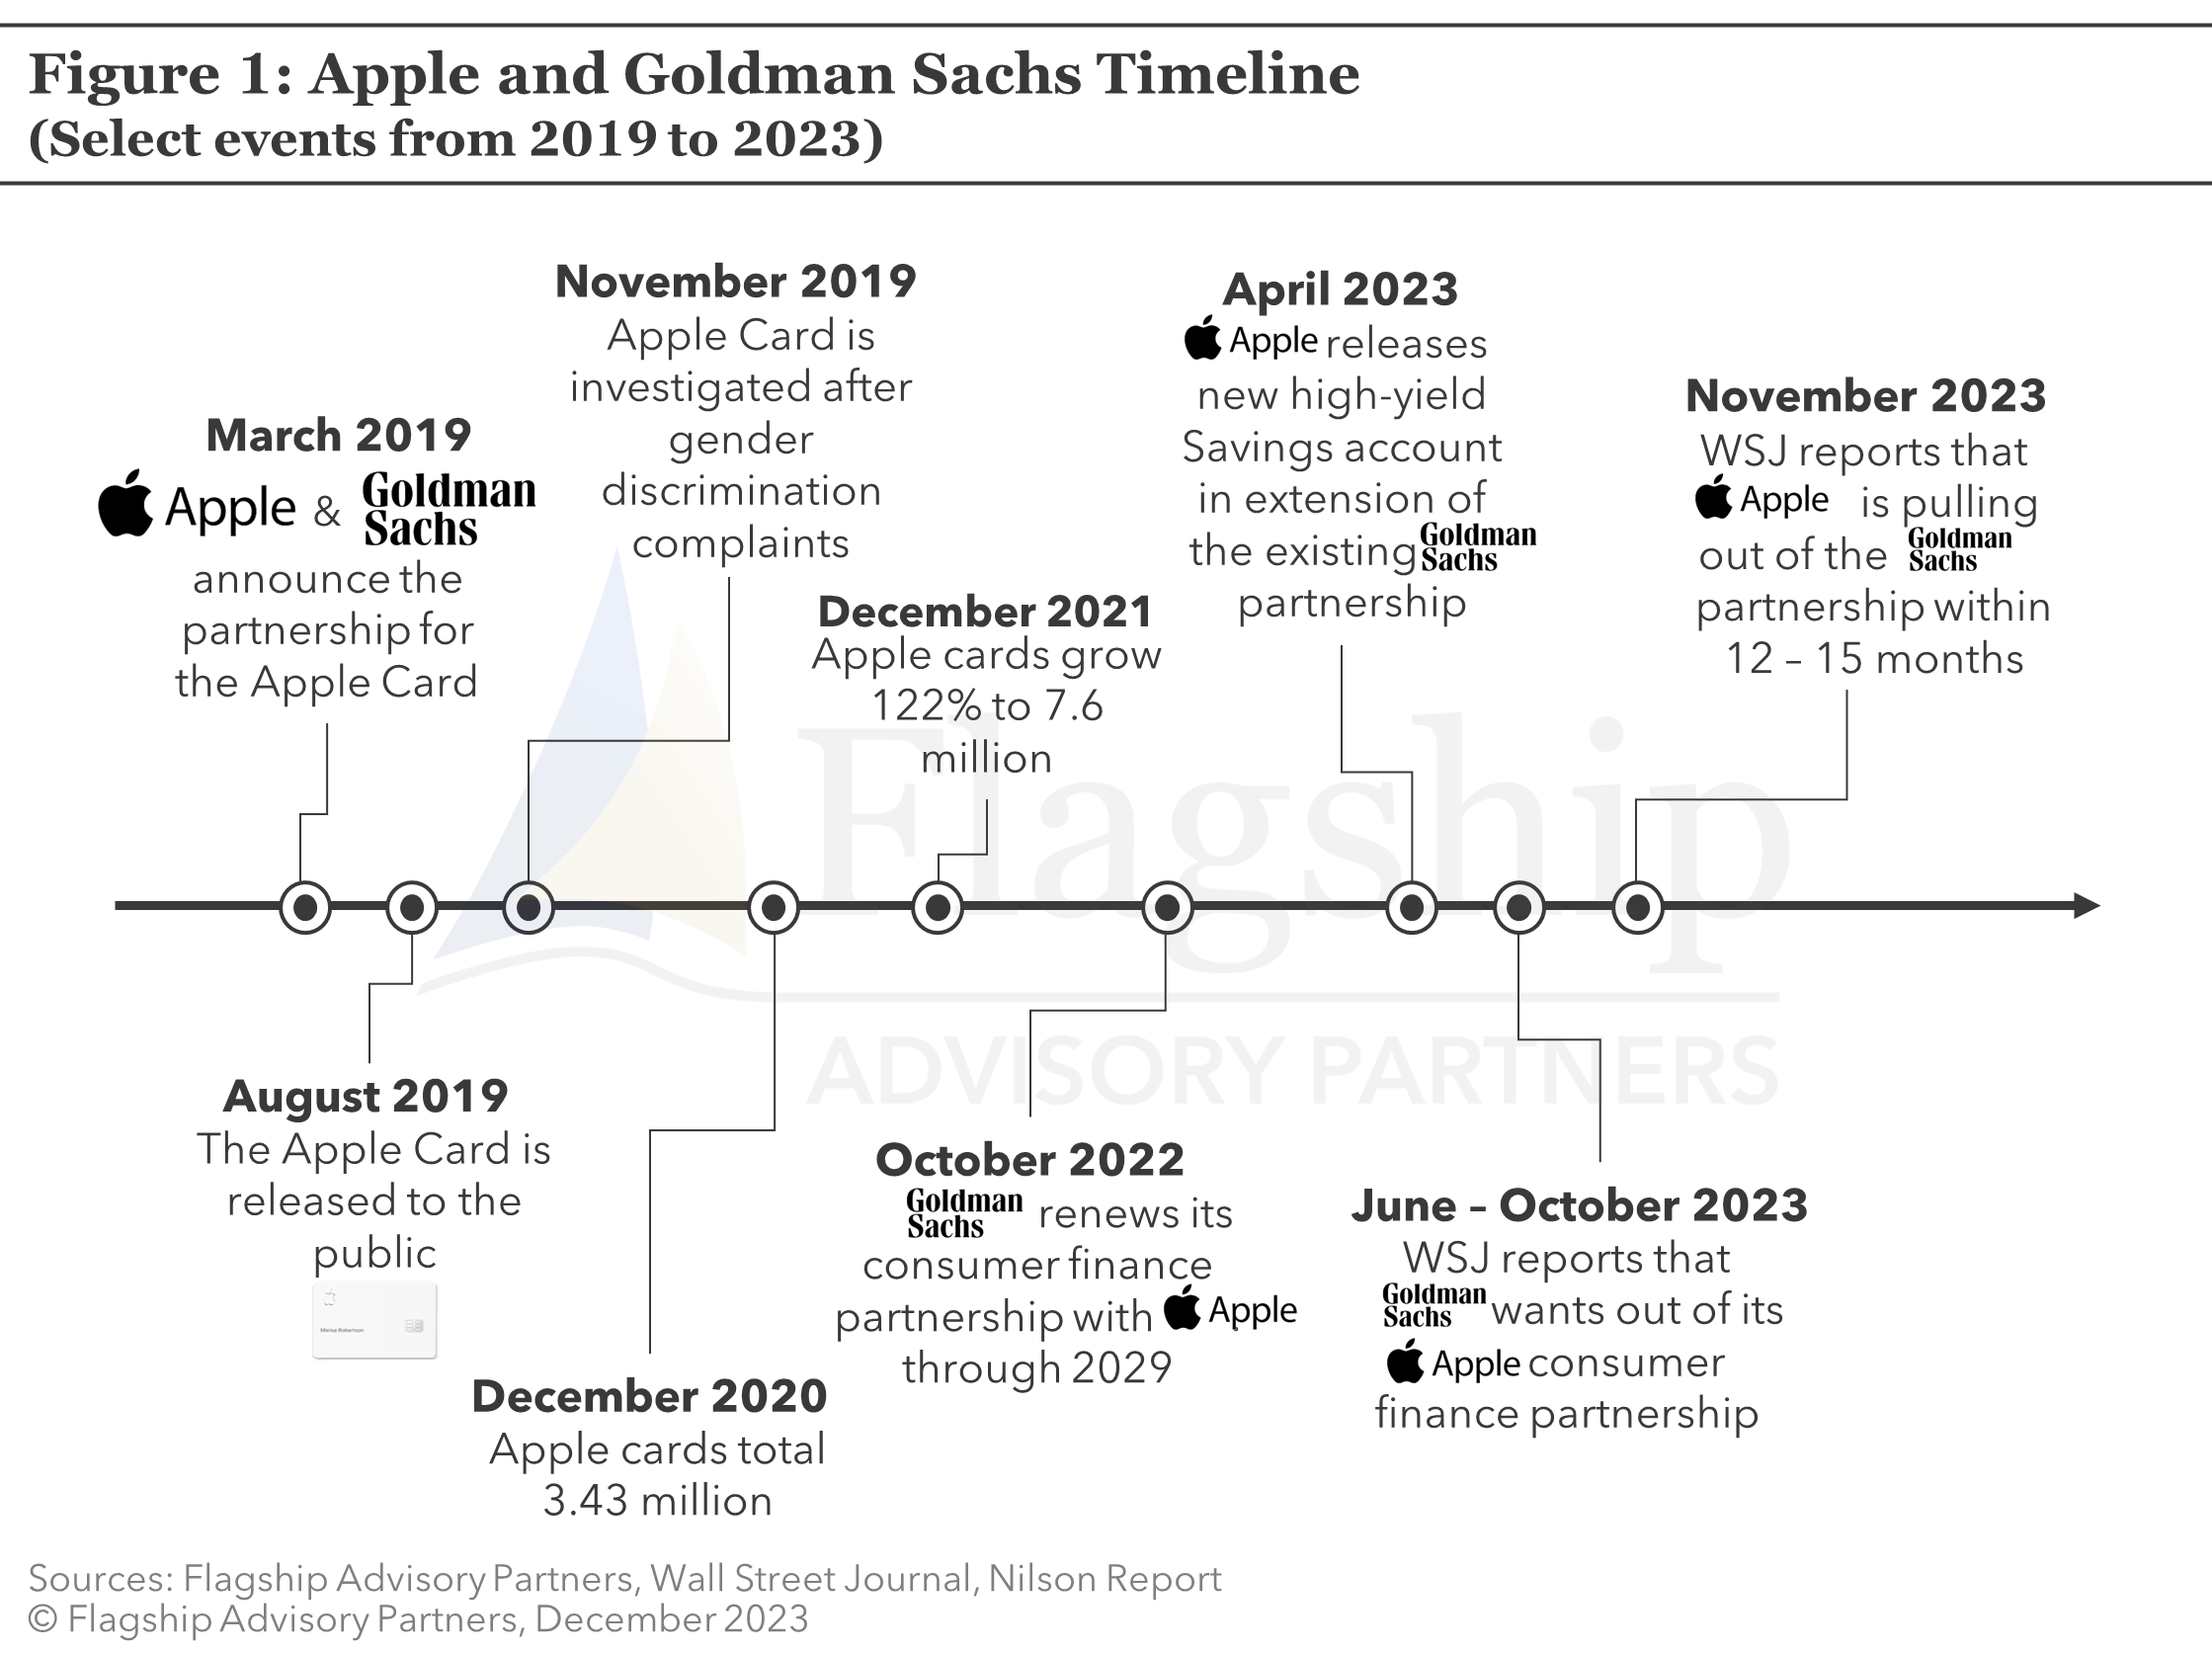 The Rise and Fall of the Apple-Goldman Sachs Consumer Finance Partnership